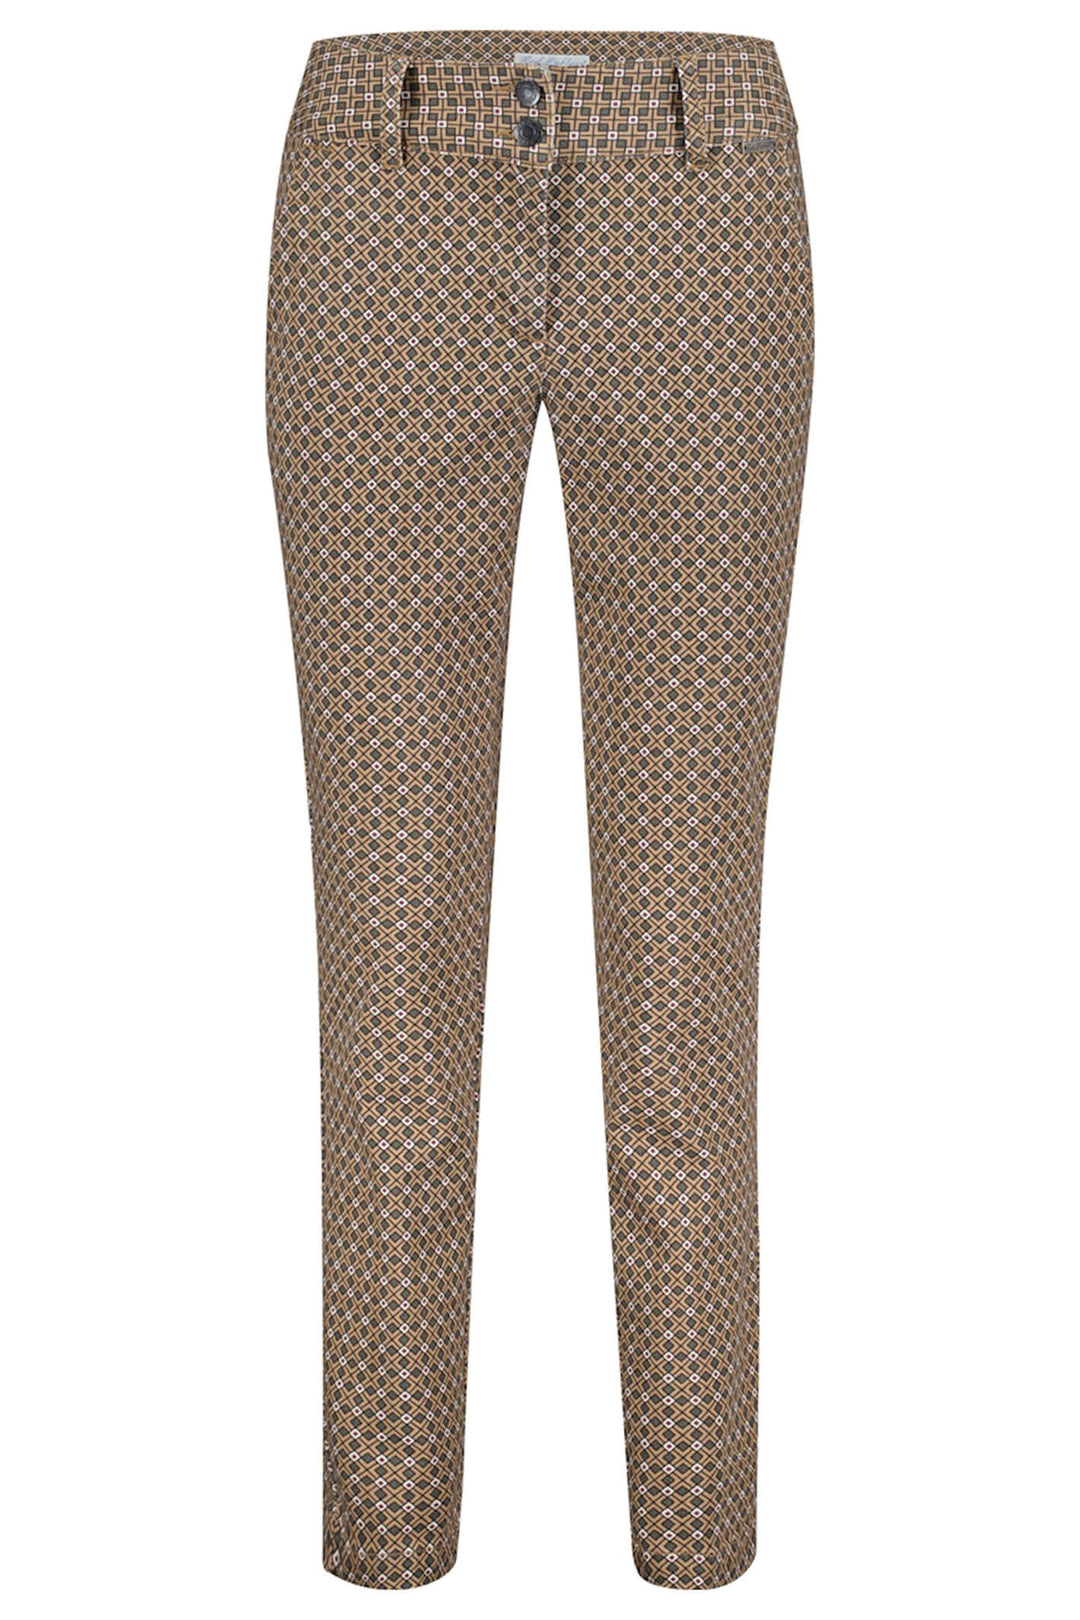 Red Button SRB4129 Diana Brown Green Fancy Print Trousers - Olivia Grace Fashion